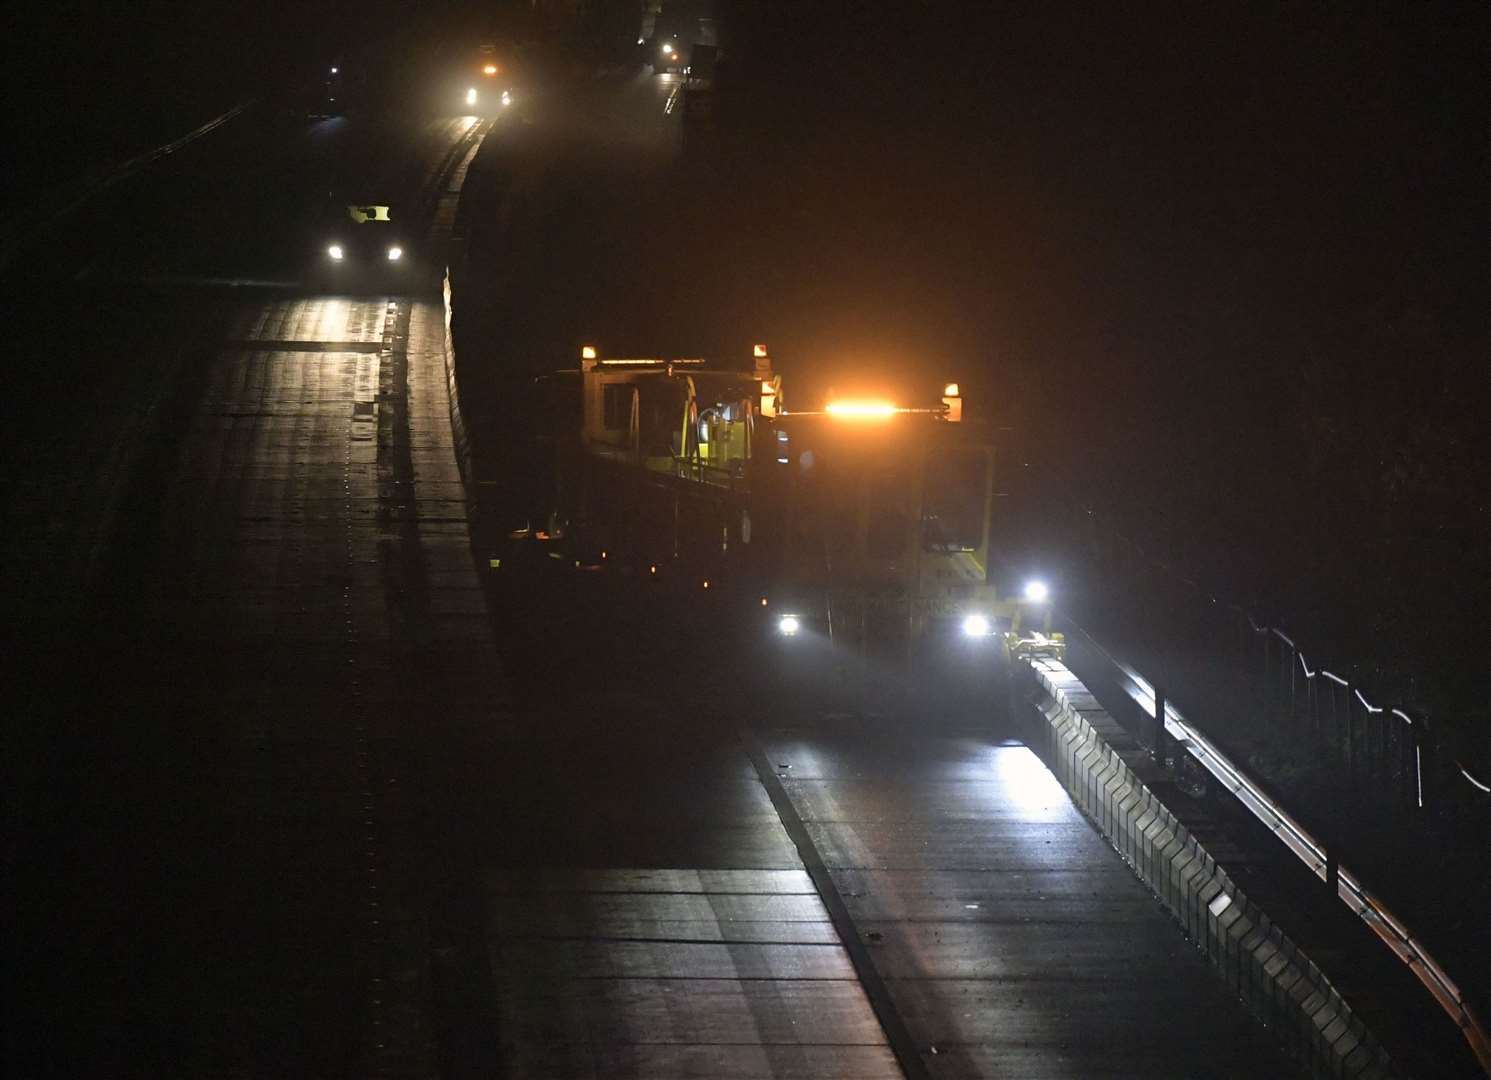 The motorway is being closed overnight until Tuesday. Picture: Barry Goodwin